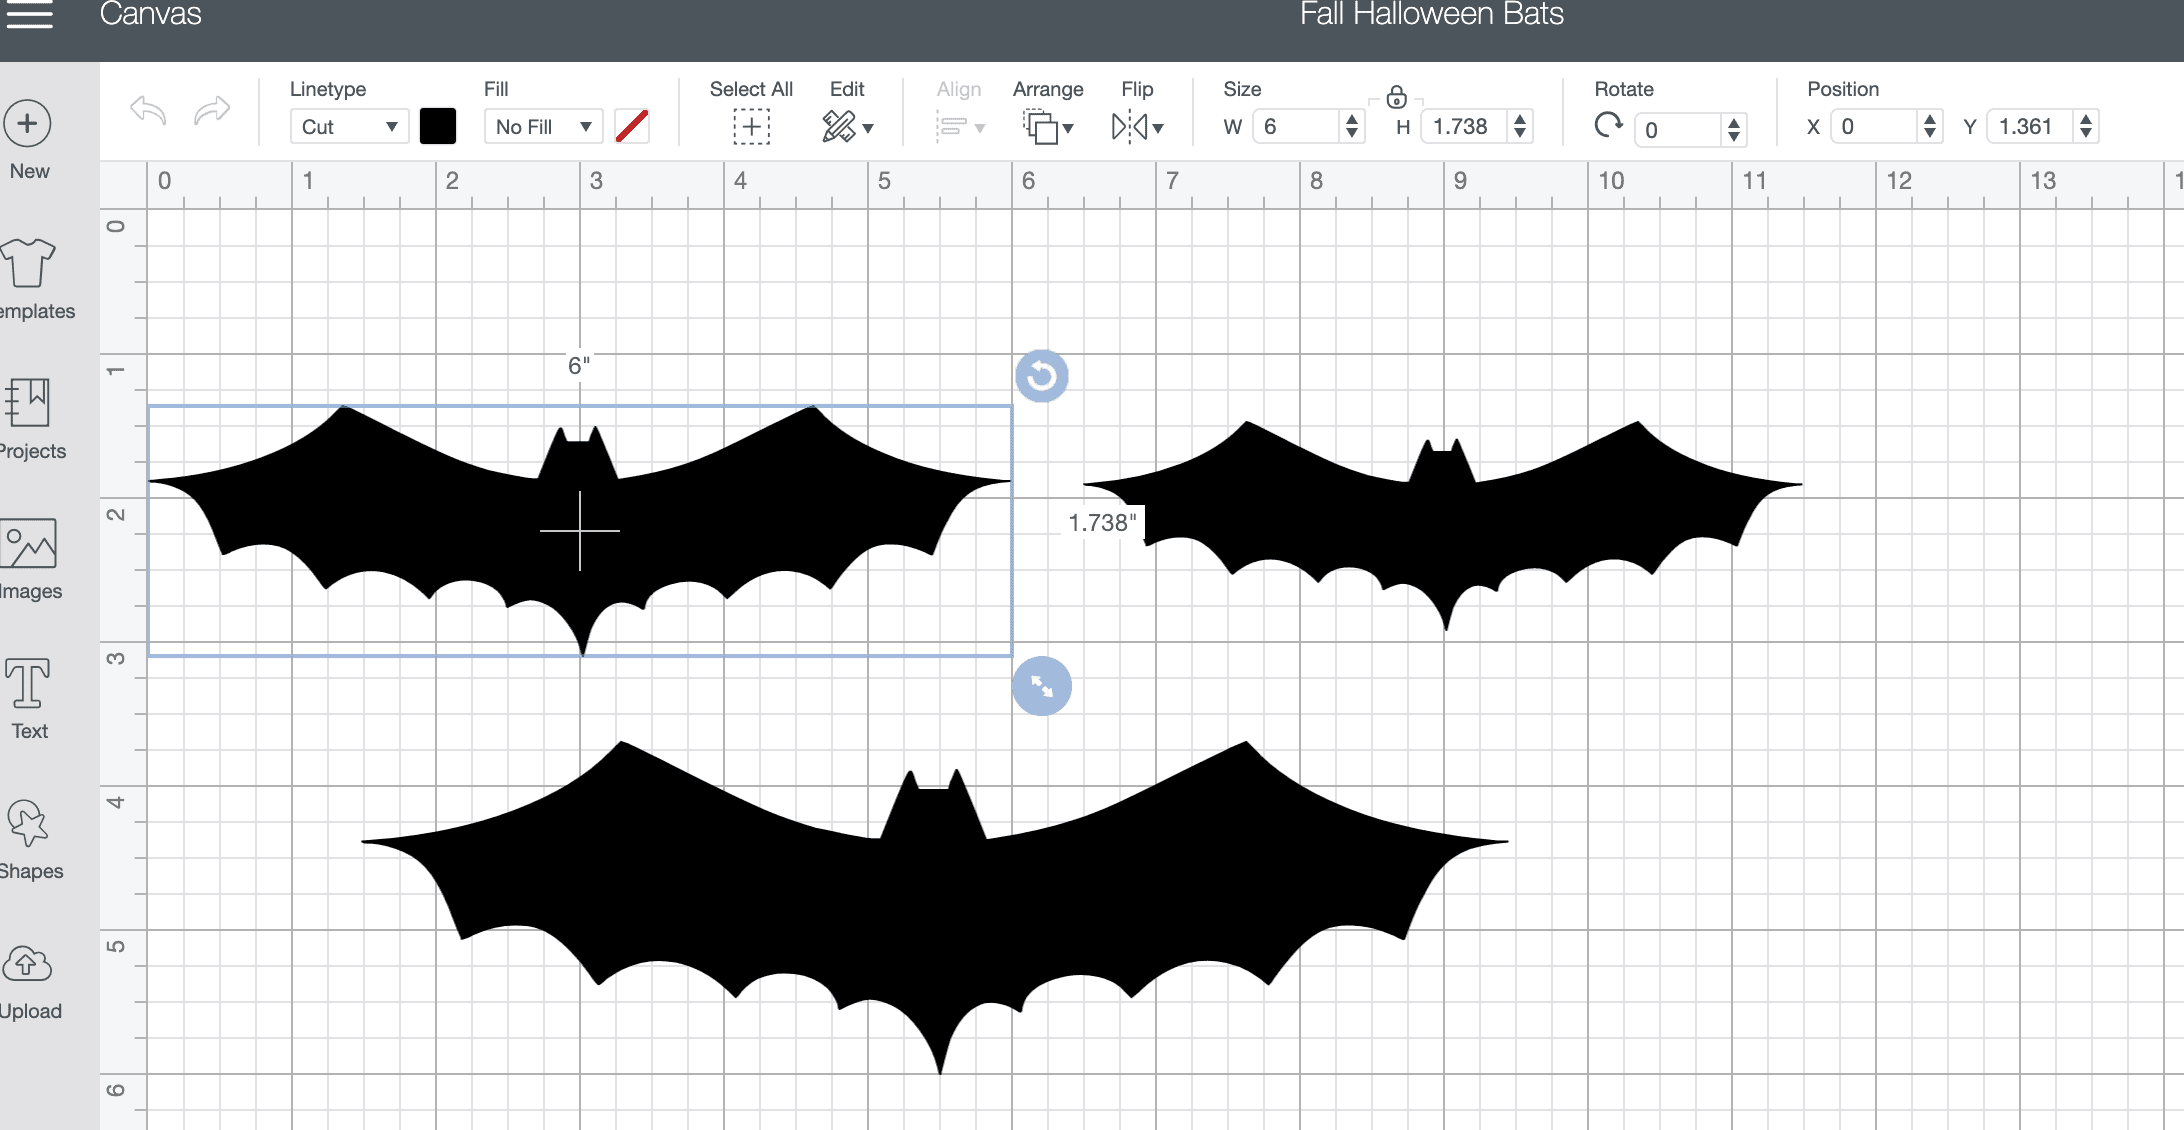 bats in different sizes